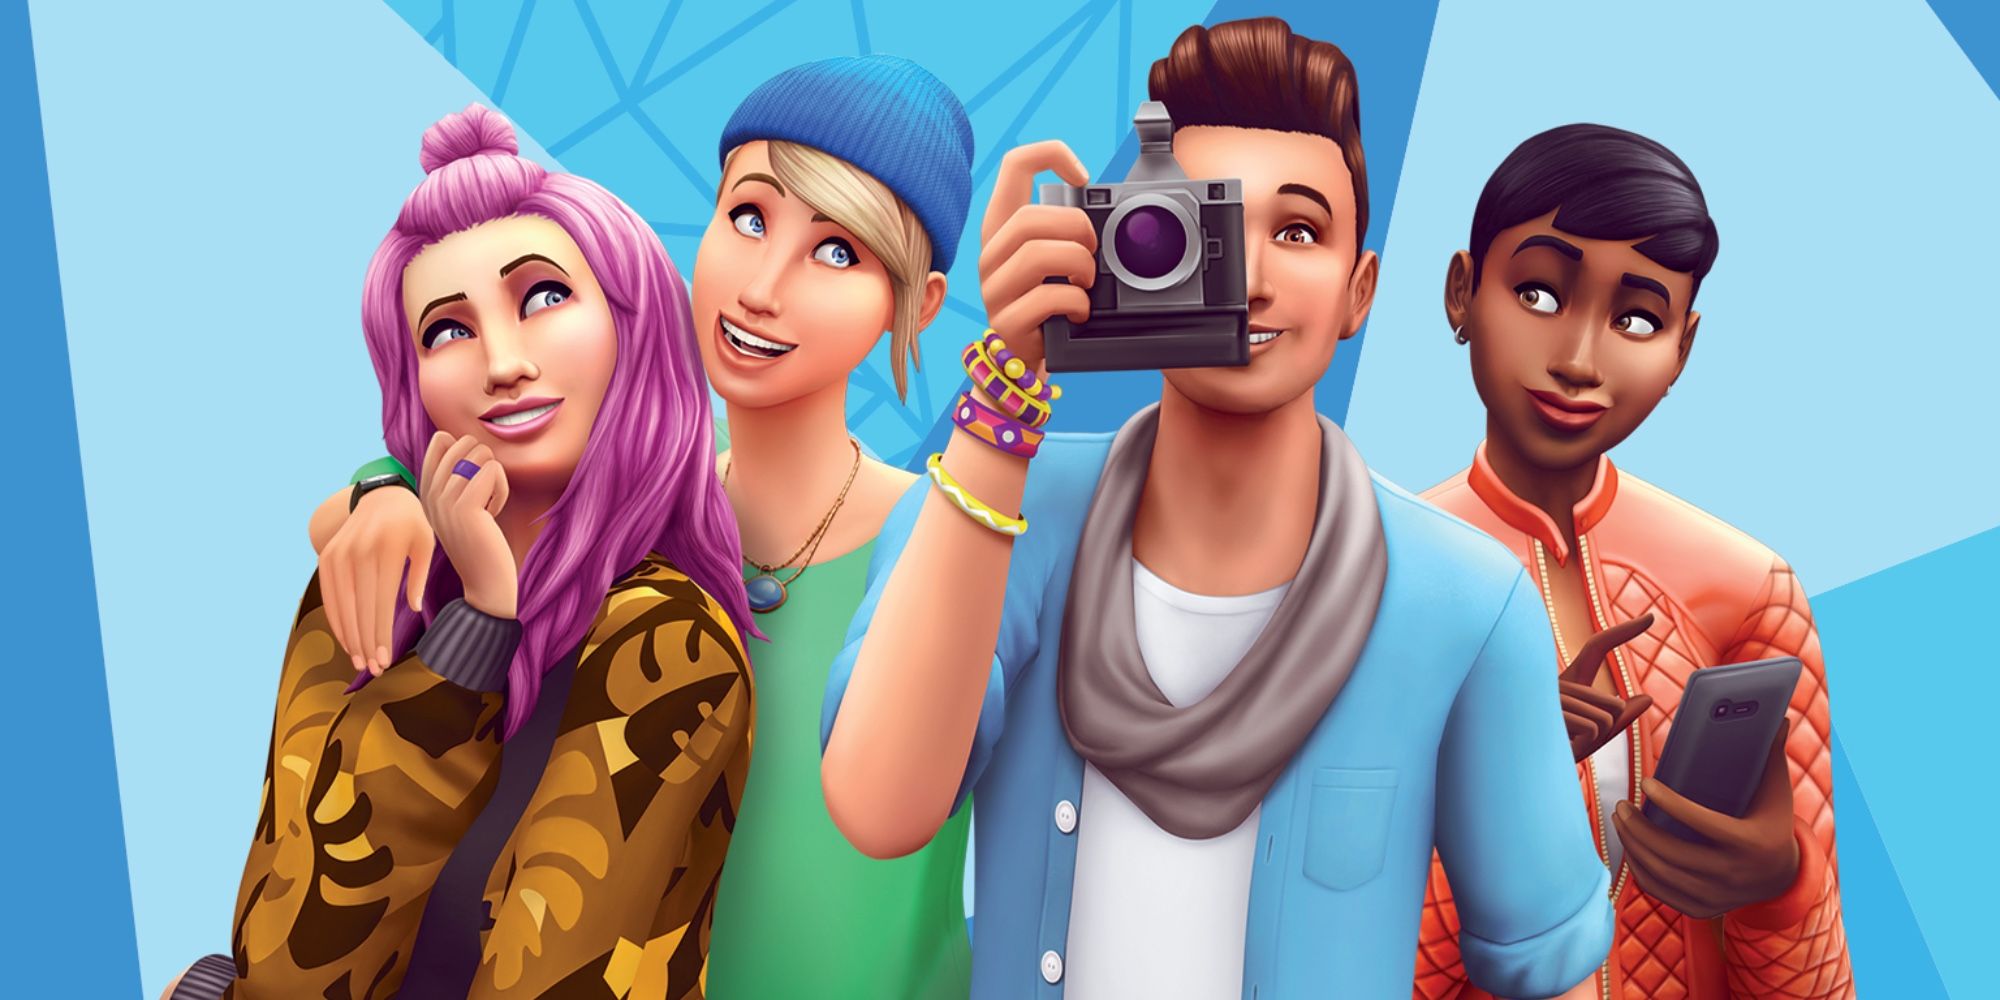 Two sims posing and smiling, one holding up a camera, and the other using their phone